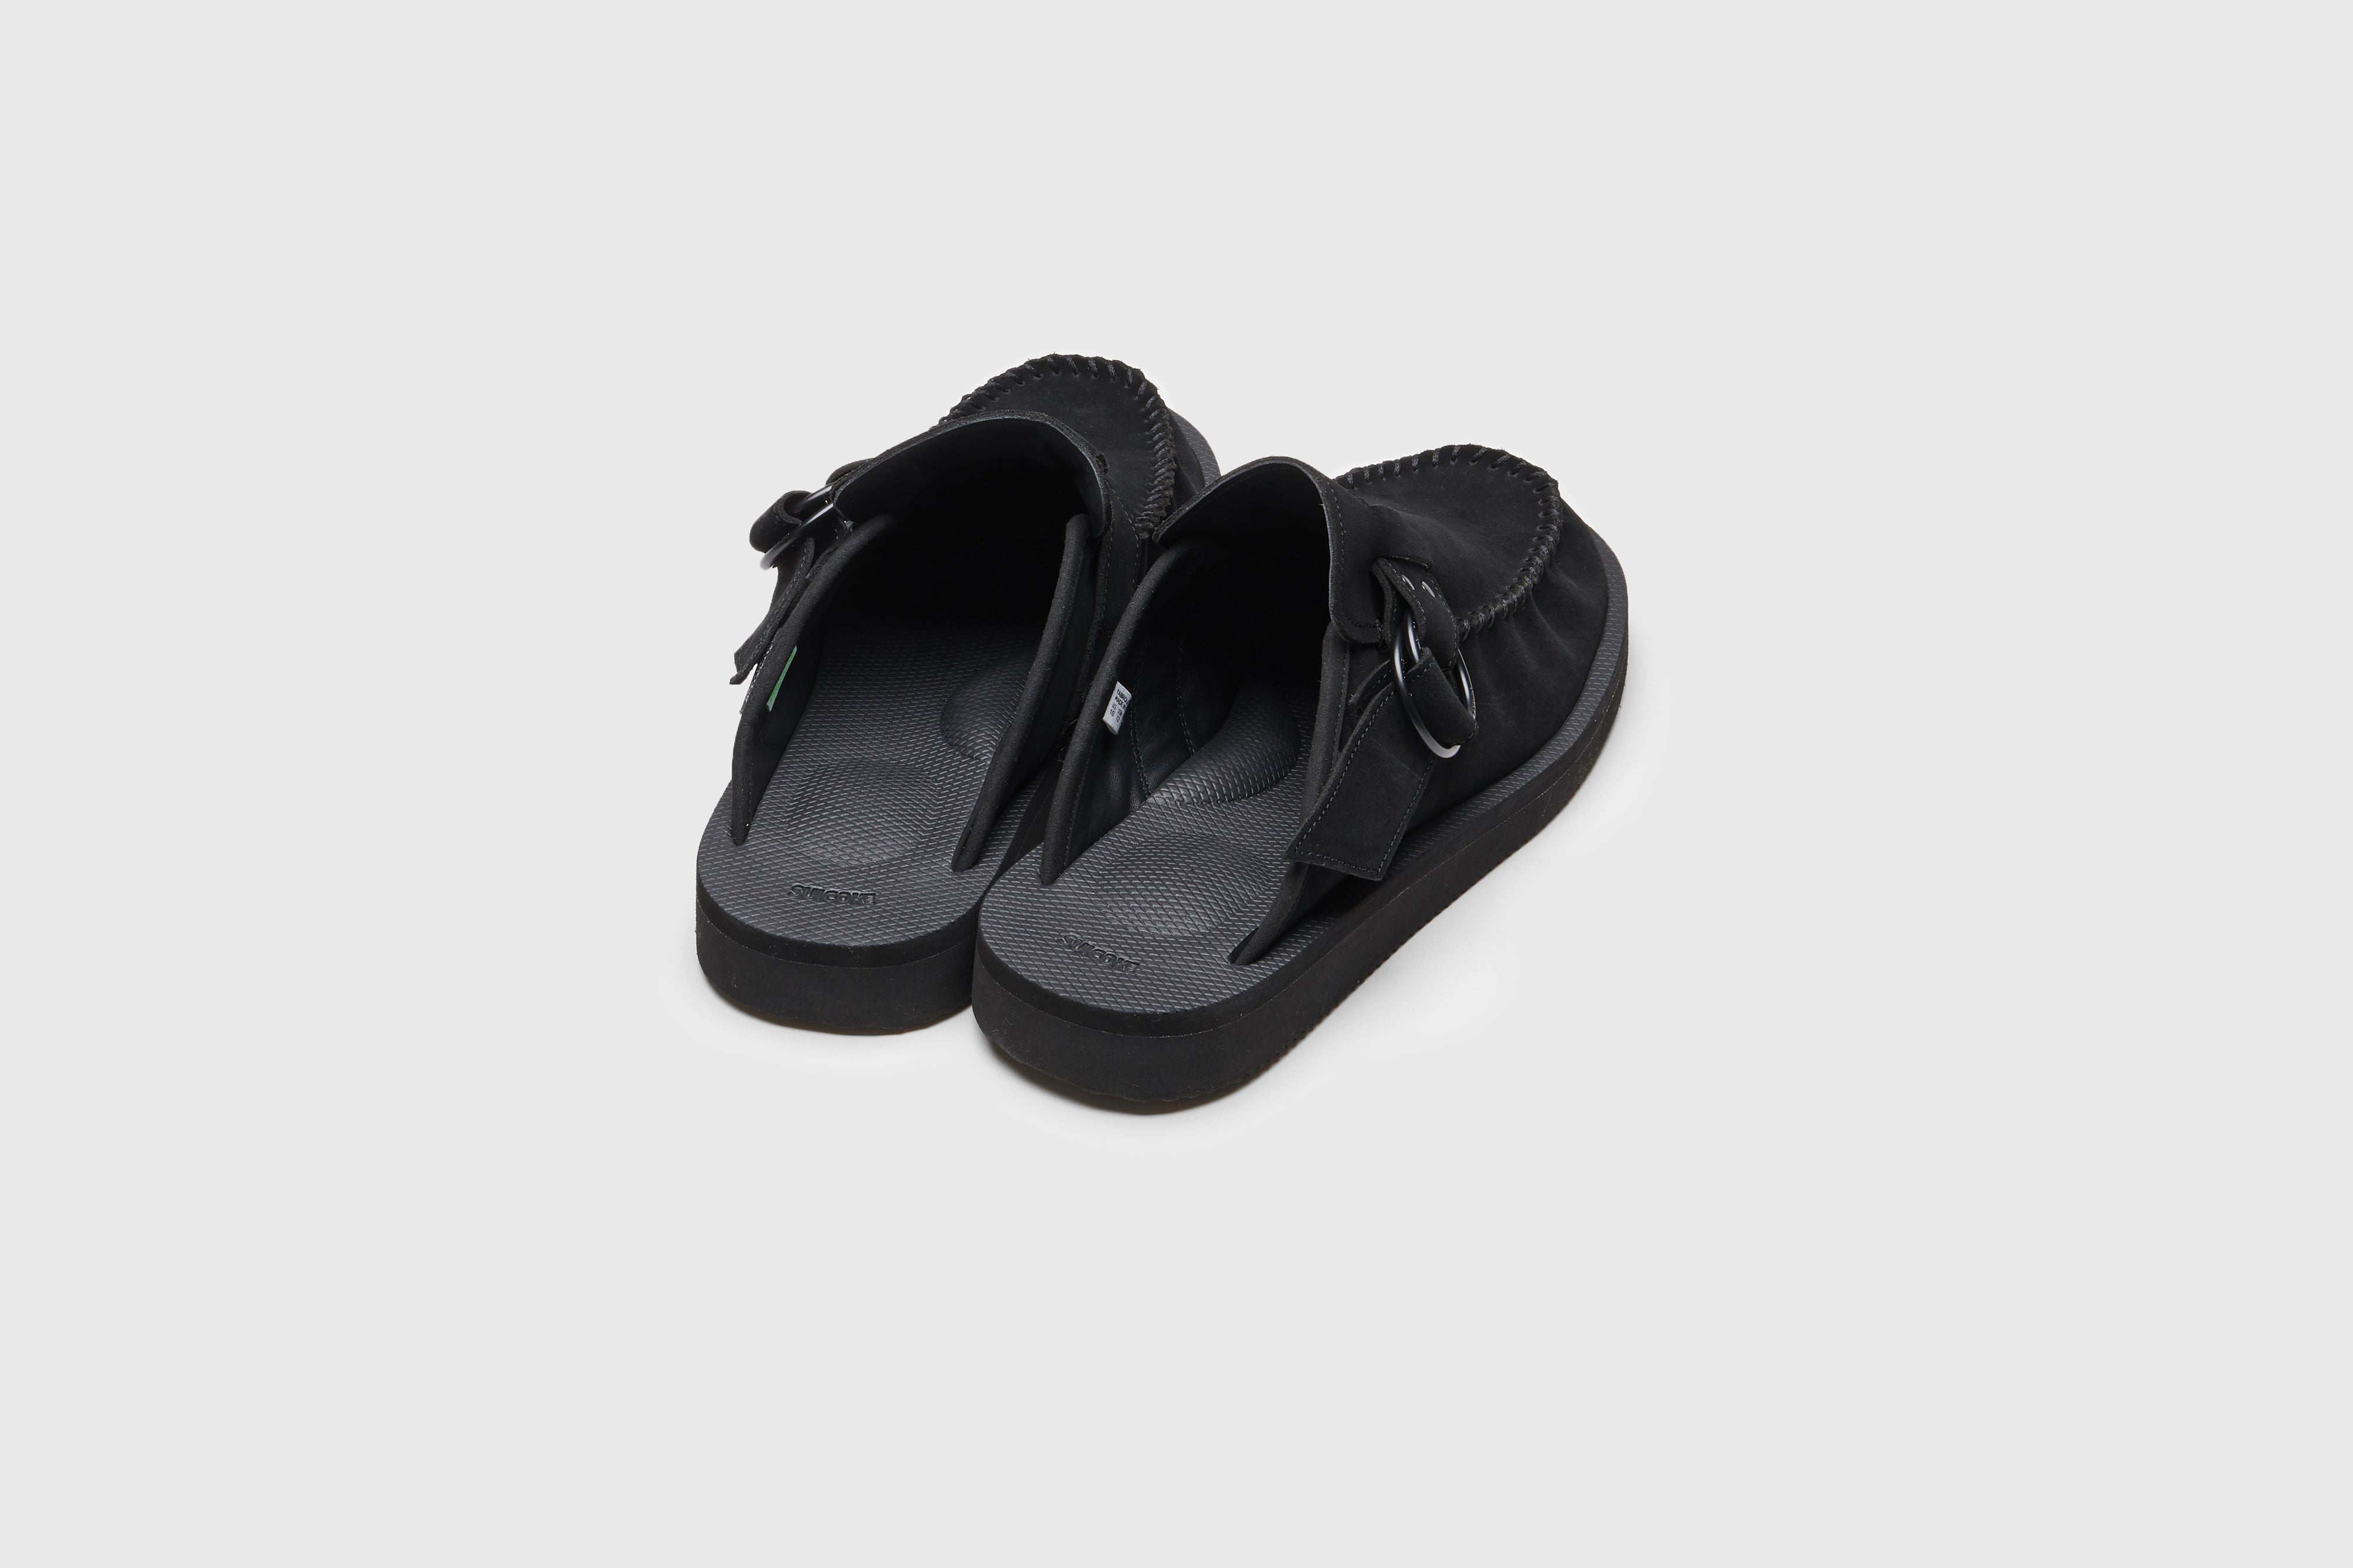 SUICOKE LEMI-Sab slides with black nylon upper, black midsole and sole, strap and logo patch. From Spring/Summer 2023 collection on eightywingold Web Store, an official partner of SUICOKE. OG-324SAB BLACK